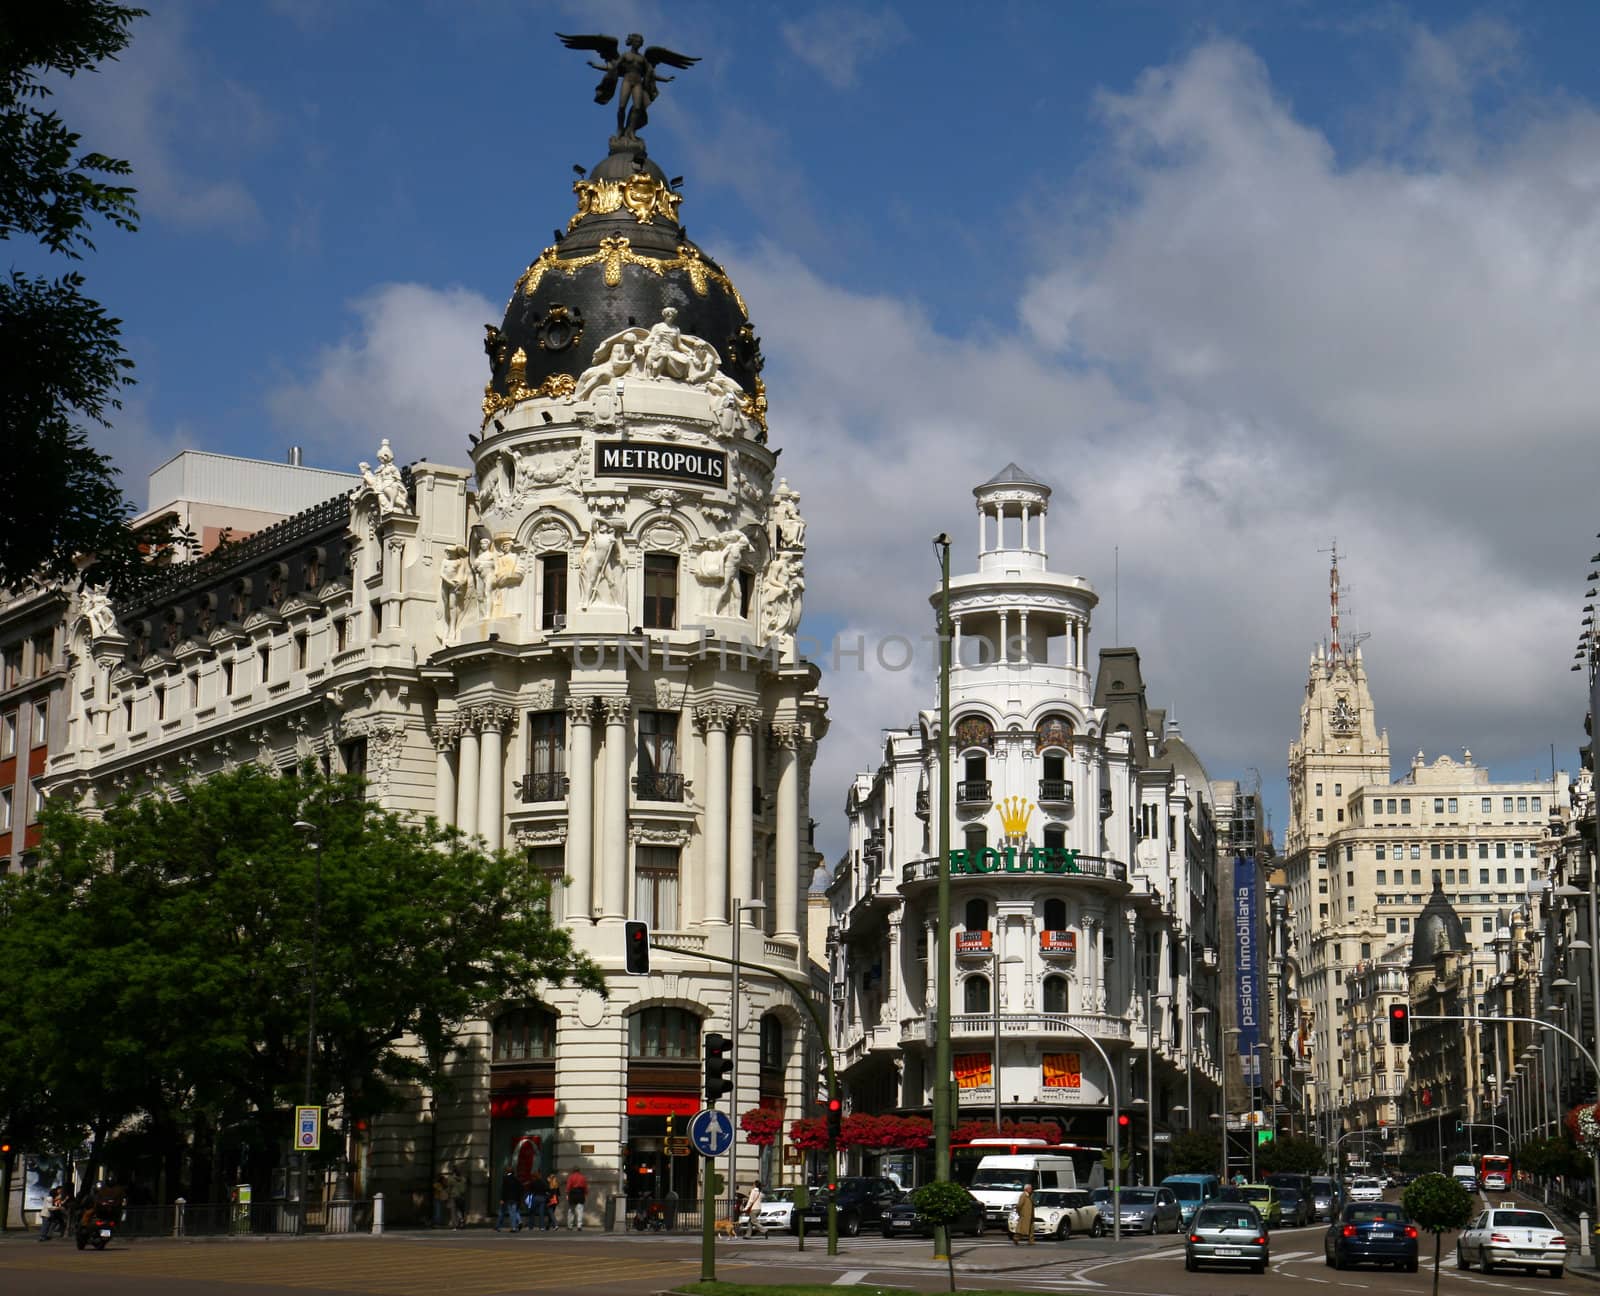 The Edificio Metrópolis or Metropolis building at the entrance of the Gran Vía, one of Madrid's major boulevards. The landmark was built between 1907 and 1911 after a design by the architects Jules & Raymond Février. The original statue was replaced in 1975 by a statue of a winged Goddess Victory.